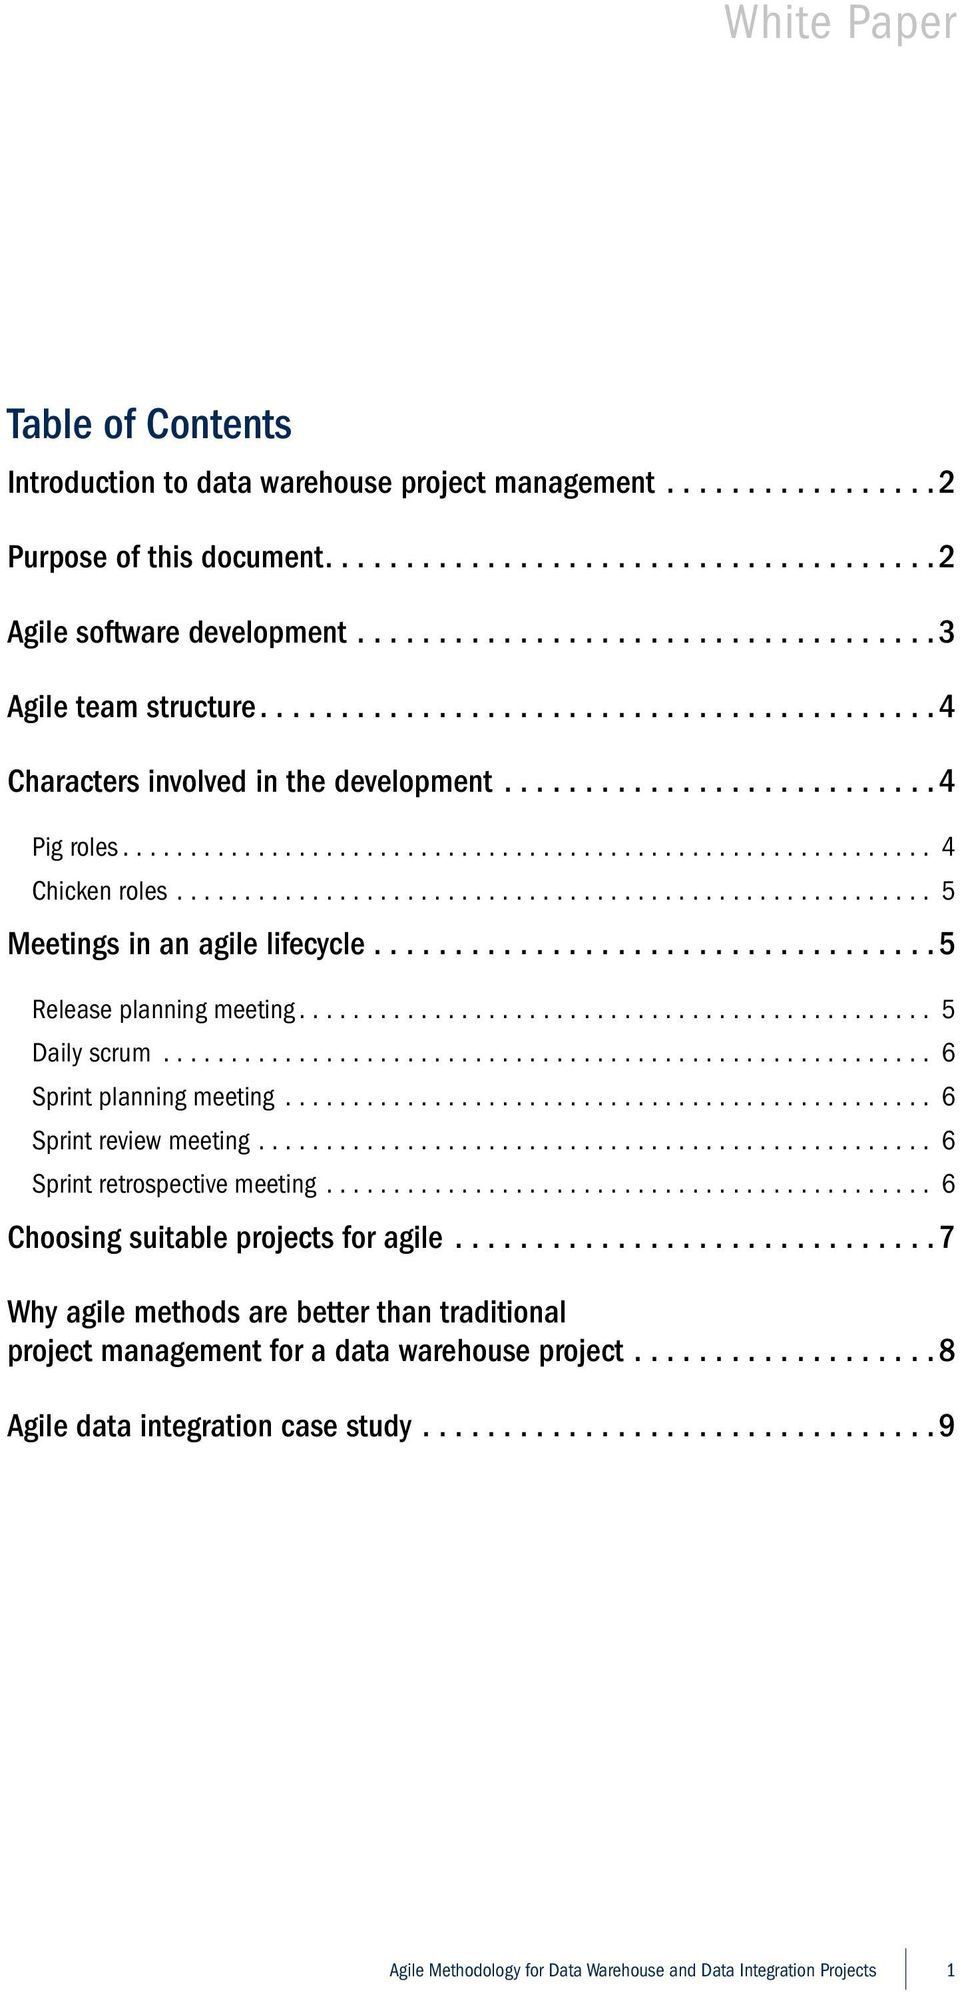 ....................................................... 5 Meetings in an agile lifecycle.................................. 5 Release planning meeting............................................... 5 Daily scrum.